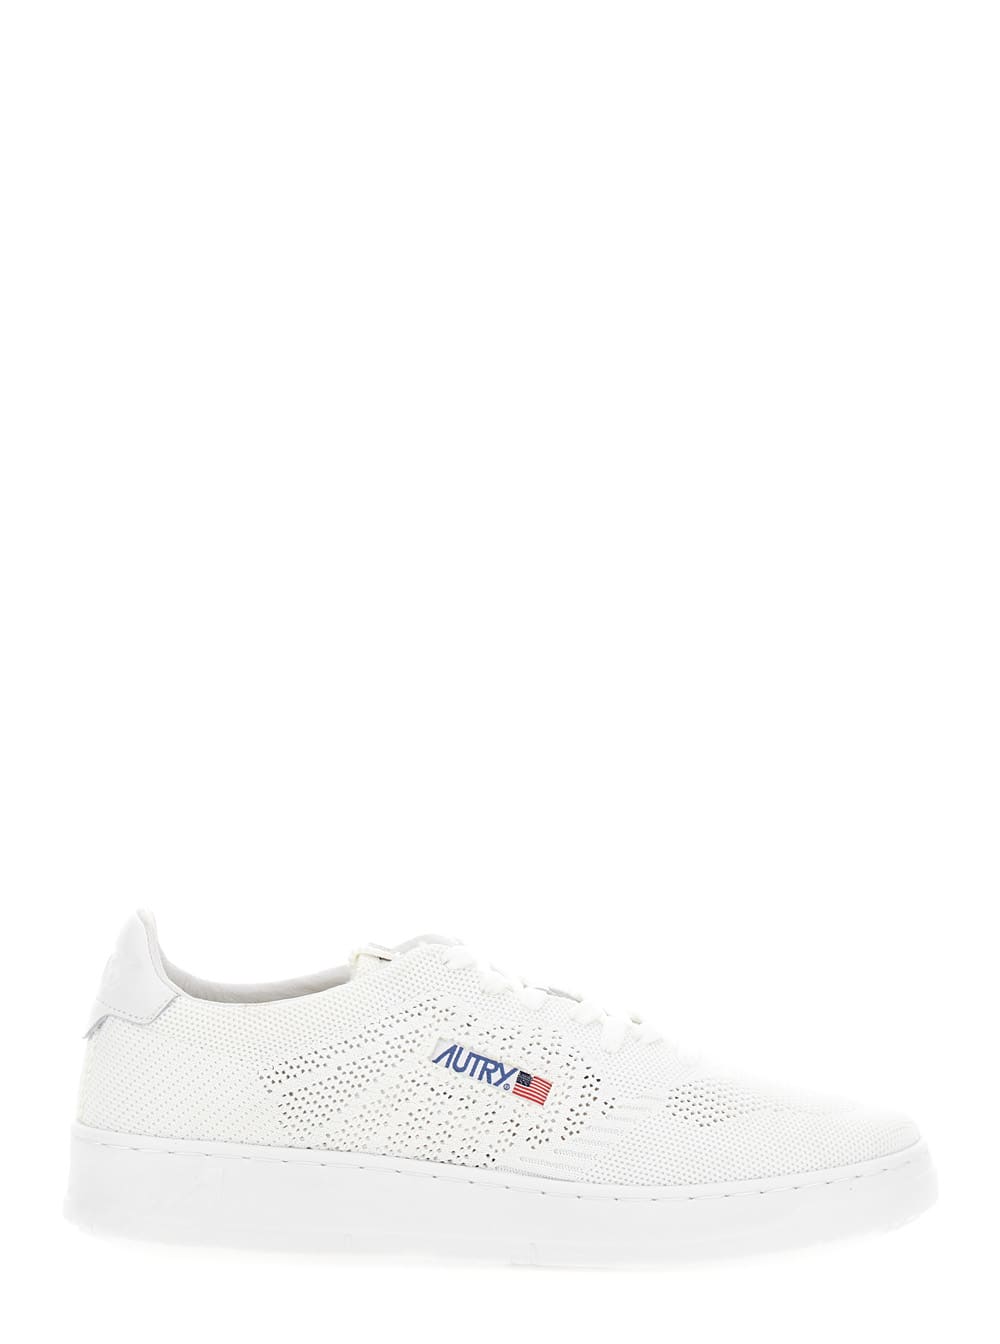 medalist Easeknit White Low Top Sneakers With Perforated Design In Knit Man